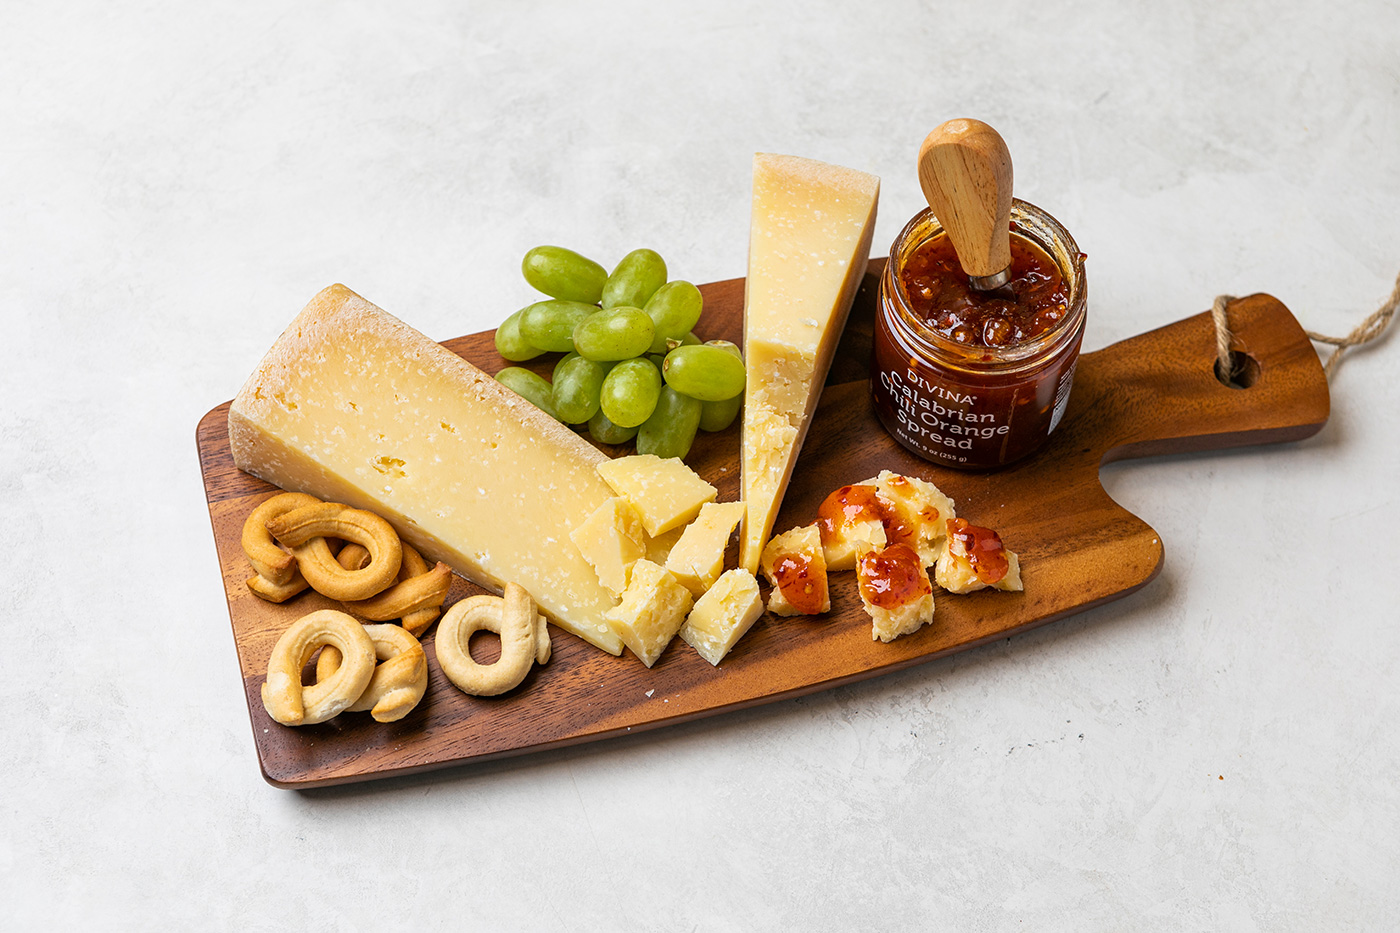 cheese, grapes and other snacks on a cutting board